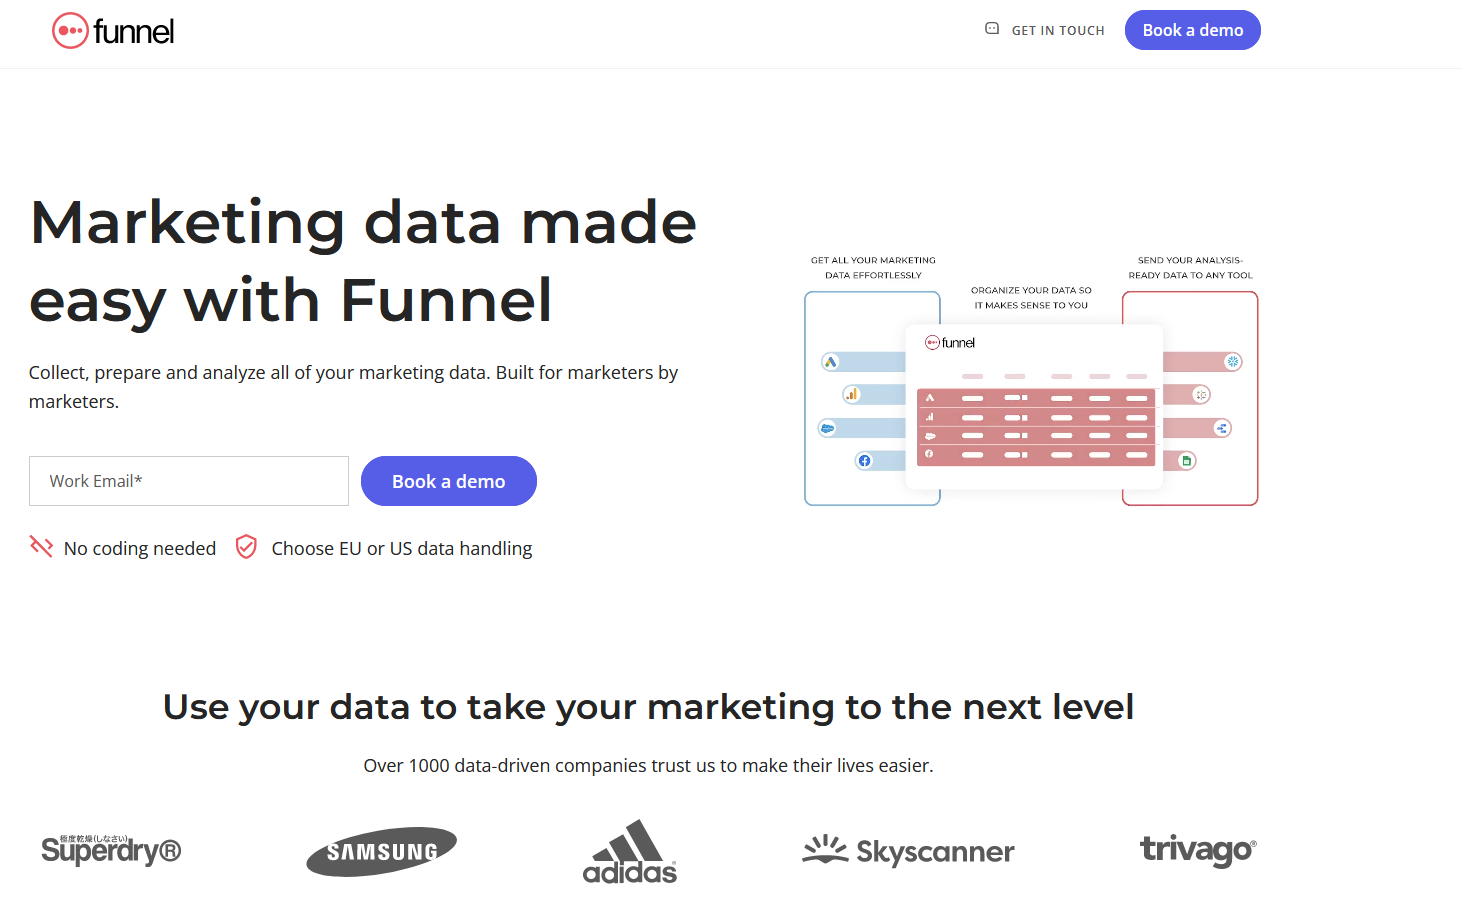 outils analytics ecommerce funnel